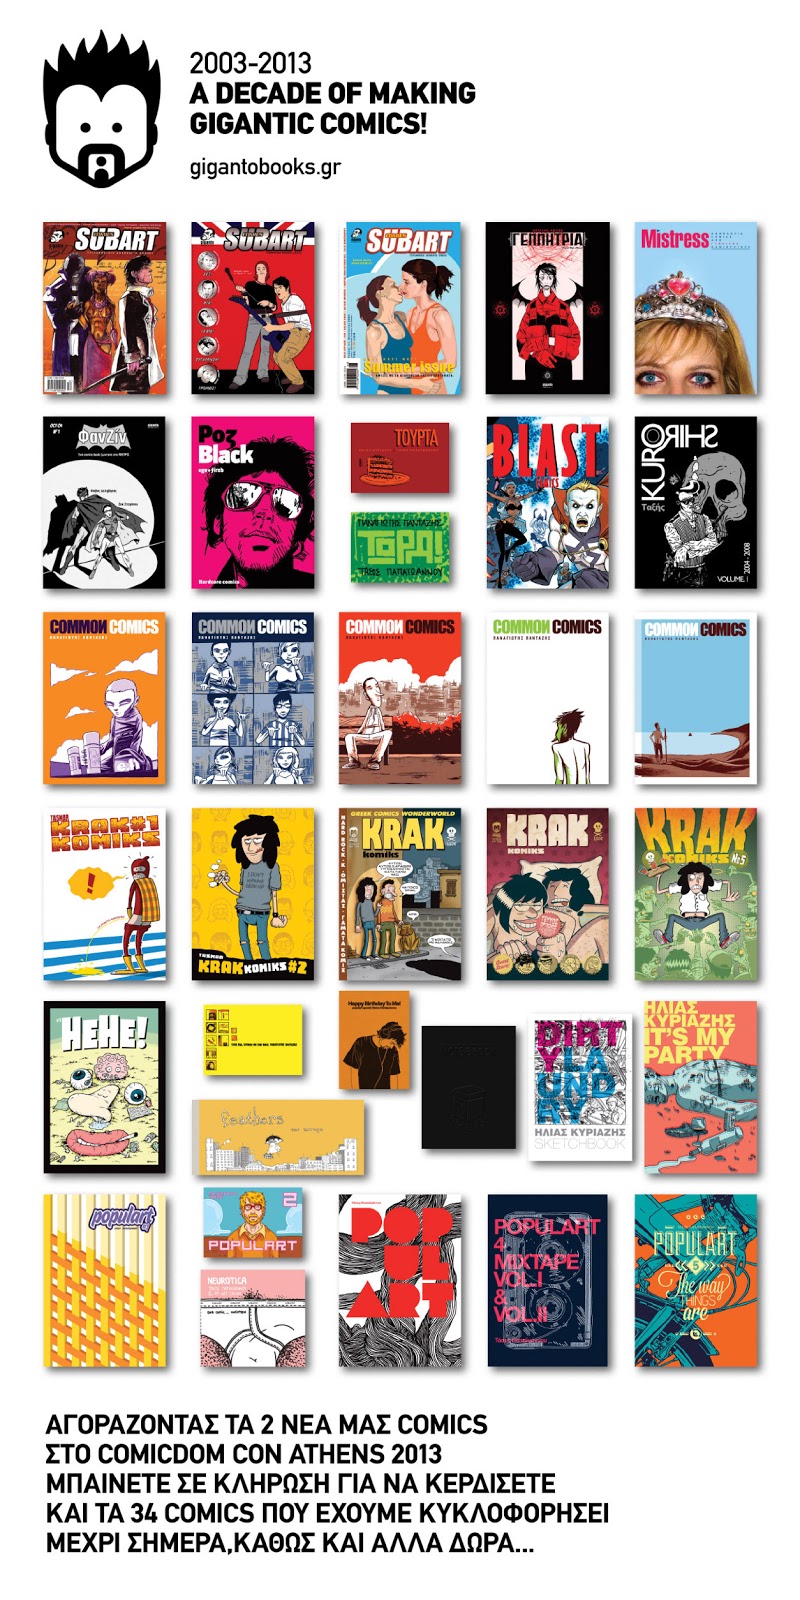 giganto_10years_all-34-comics_contest_low_1300x2600px